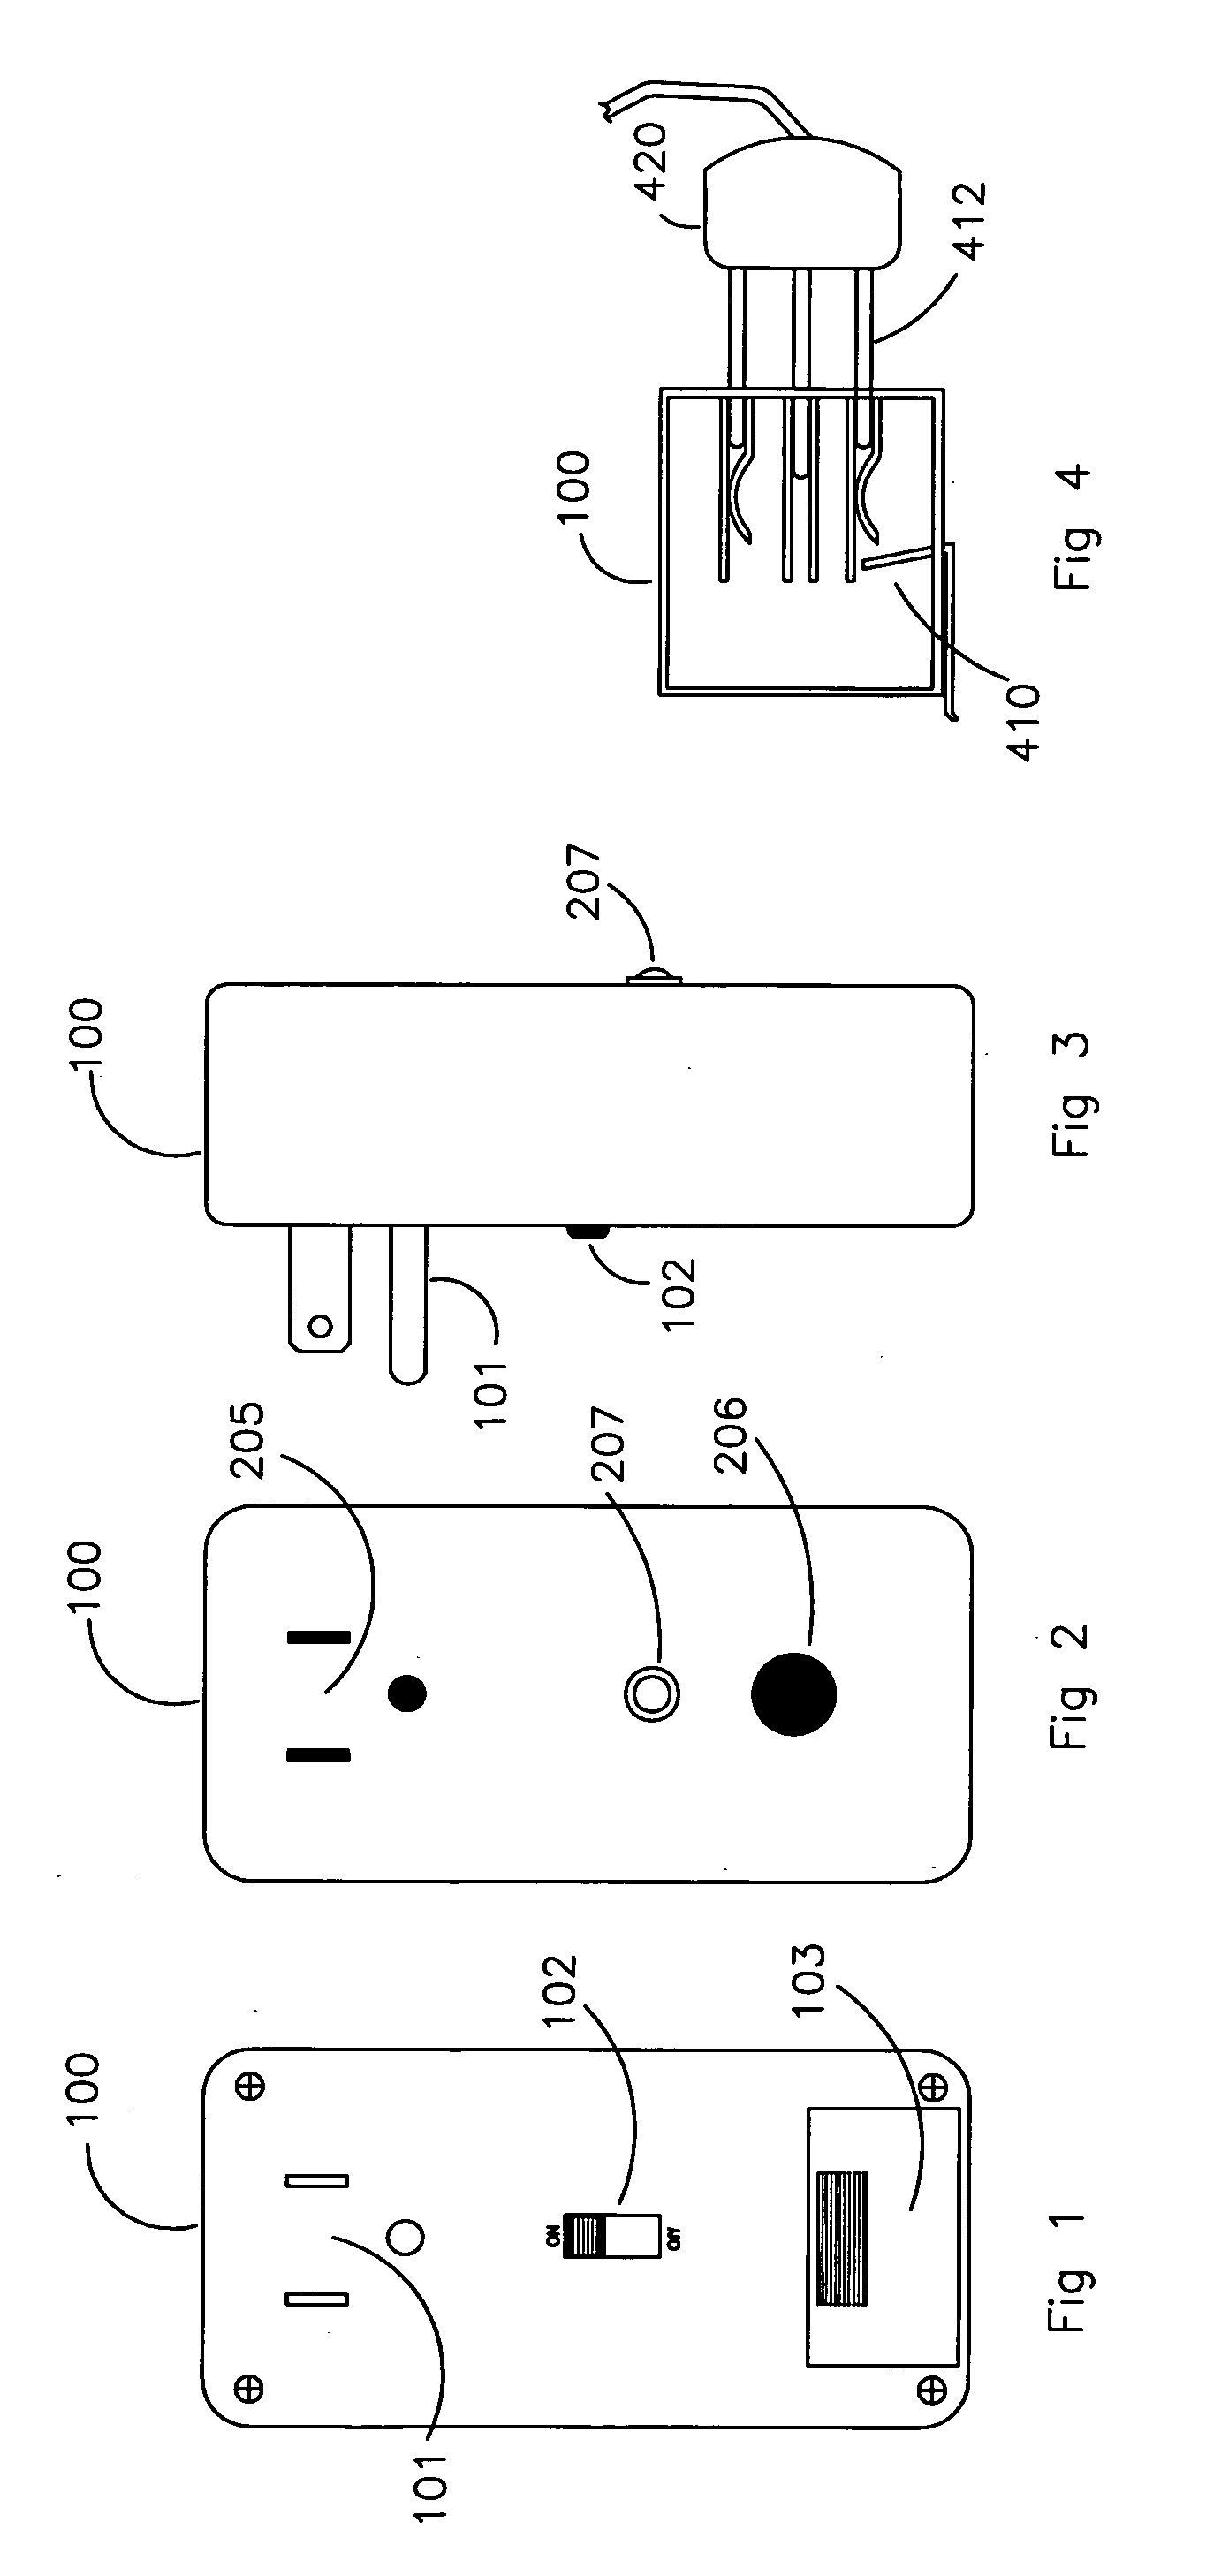 Device for monitoring and alerting of a power disruption to electrical equipment or an appliance